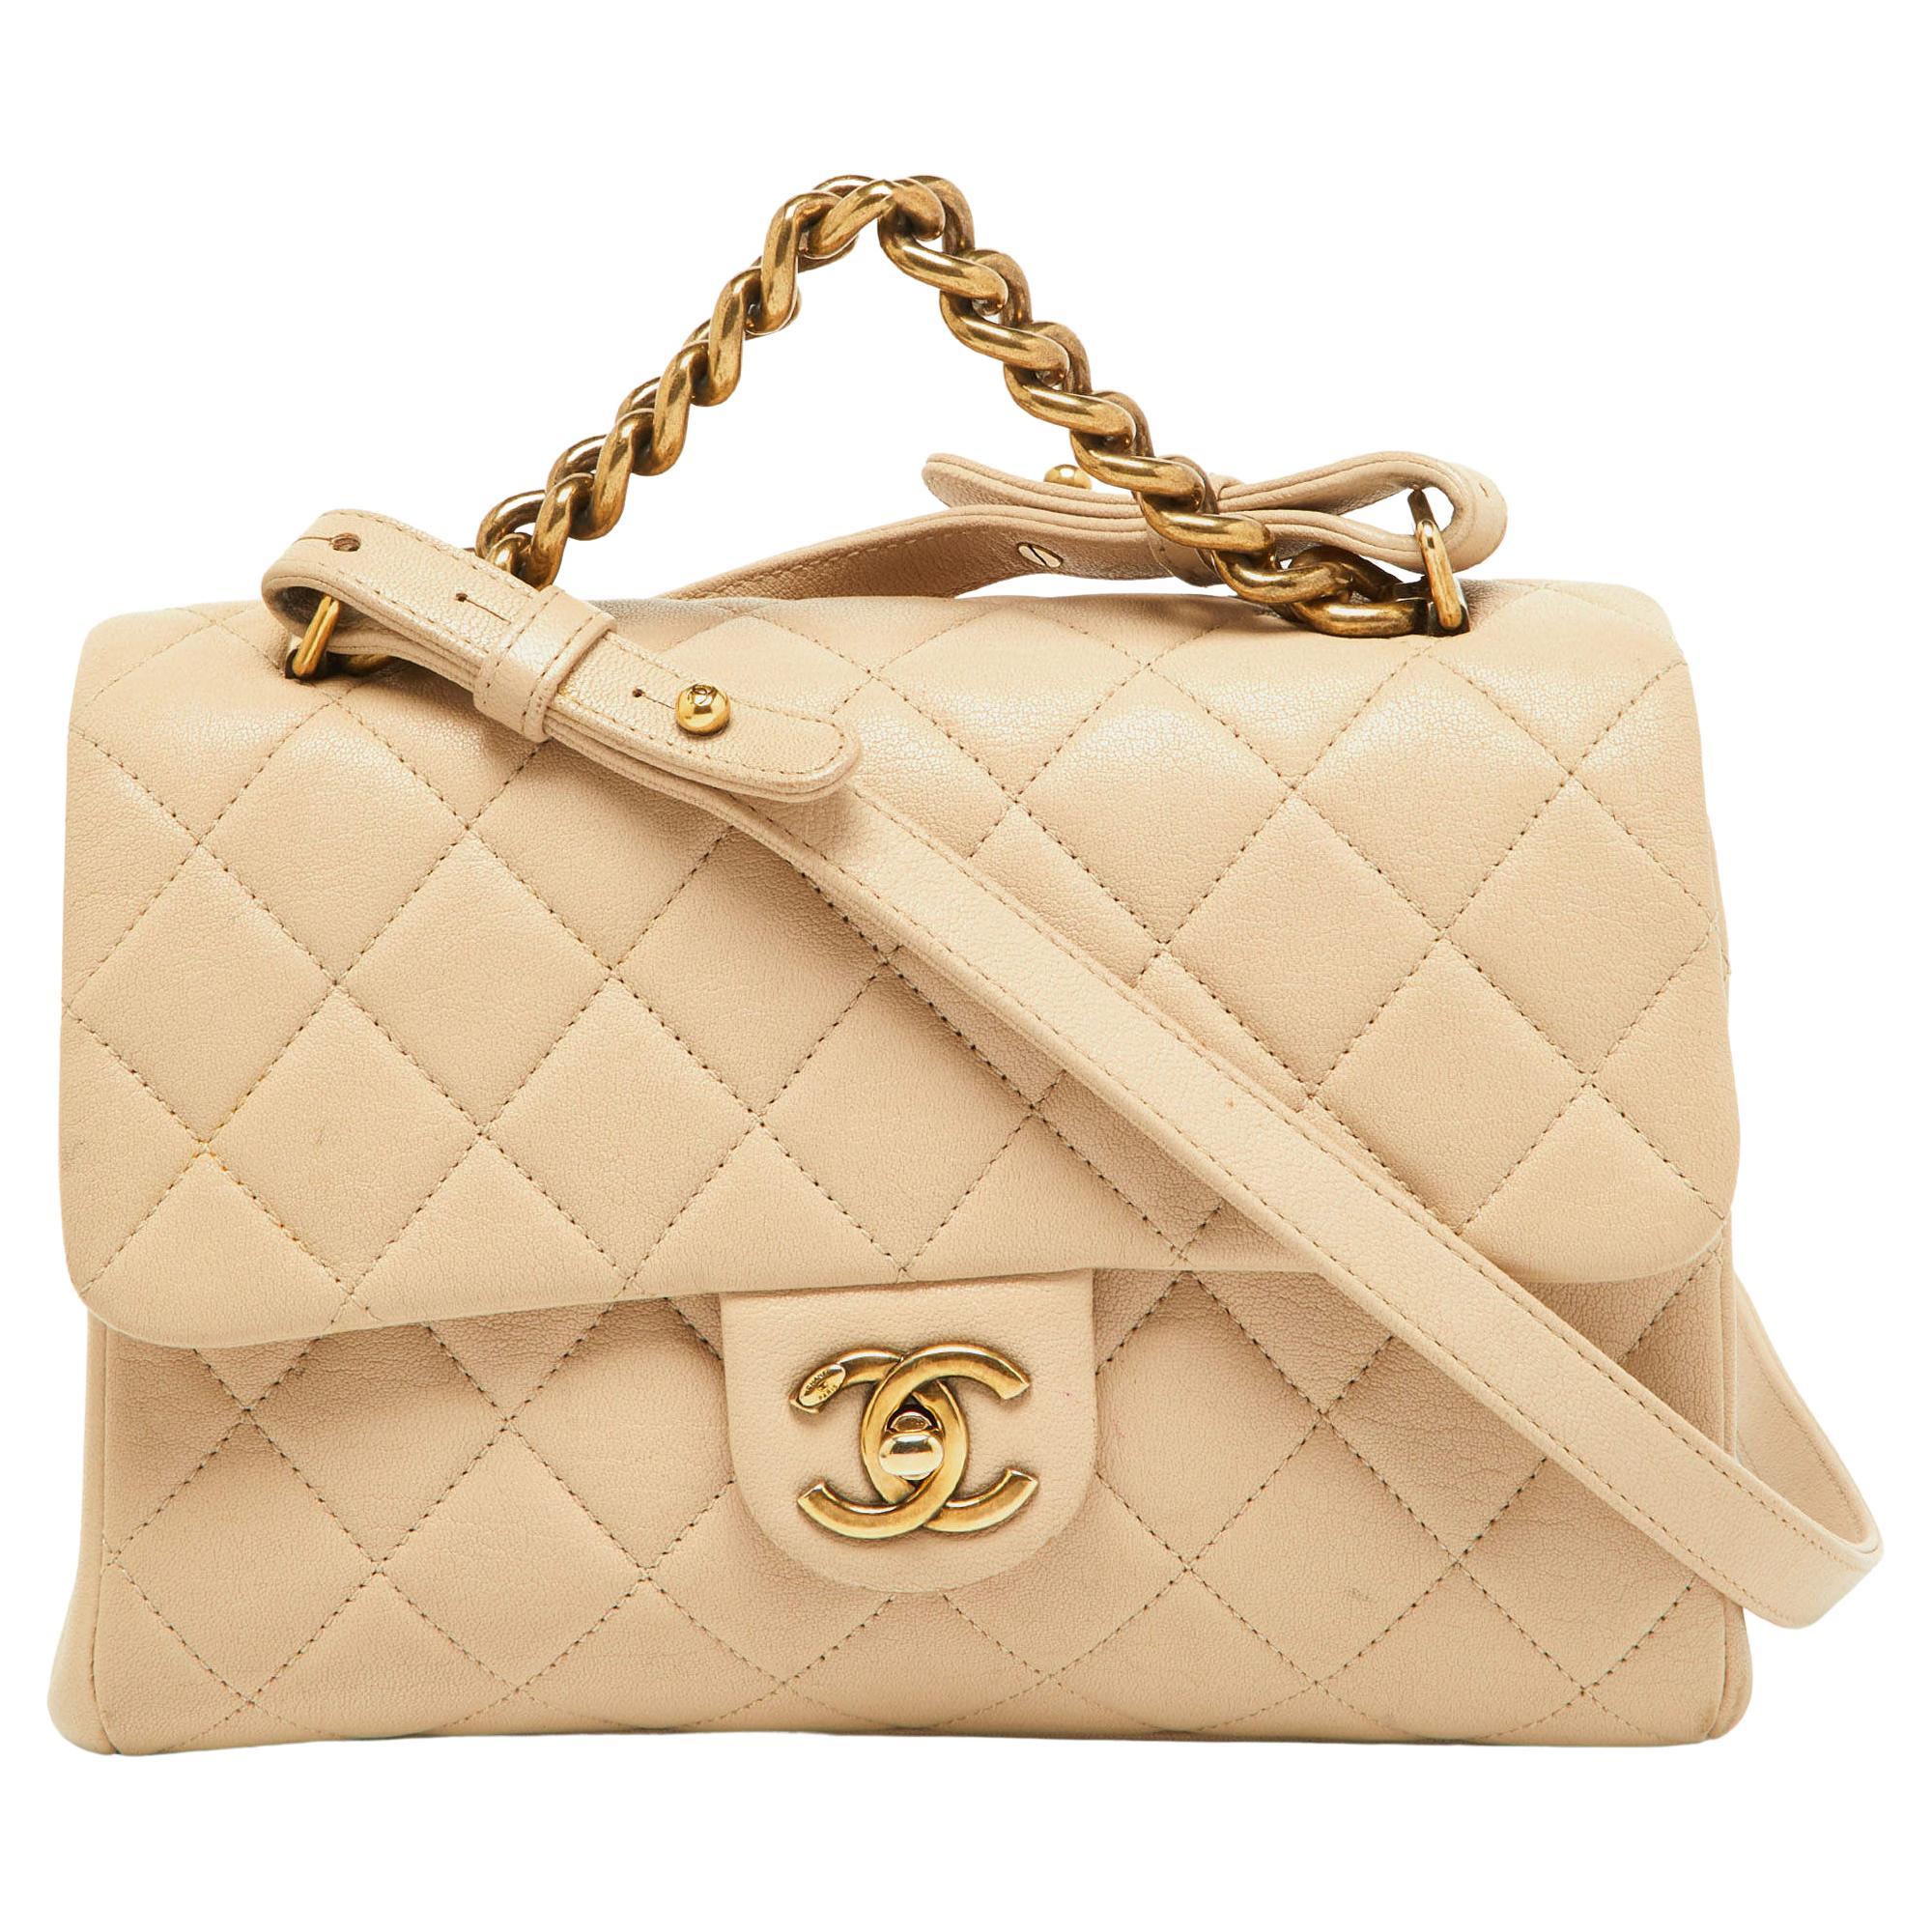 Chanel Beige Quilted Leather Small Trapezio Bag